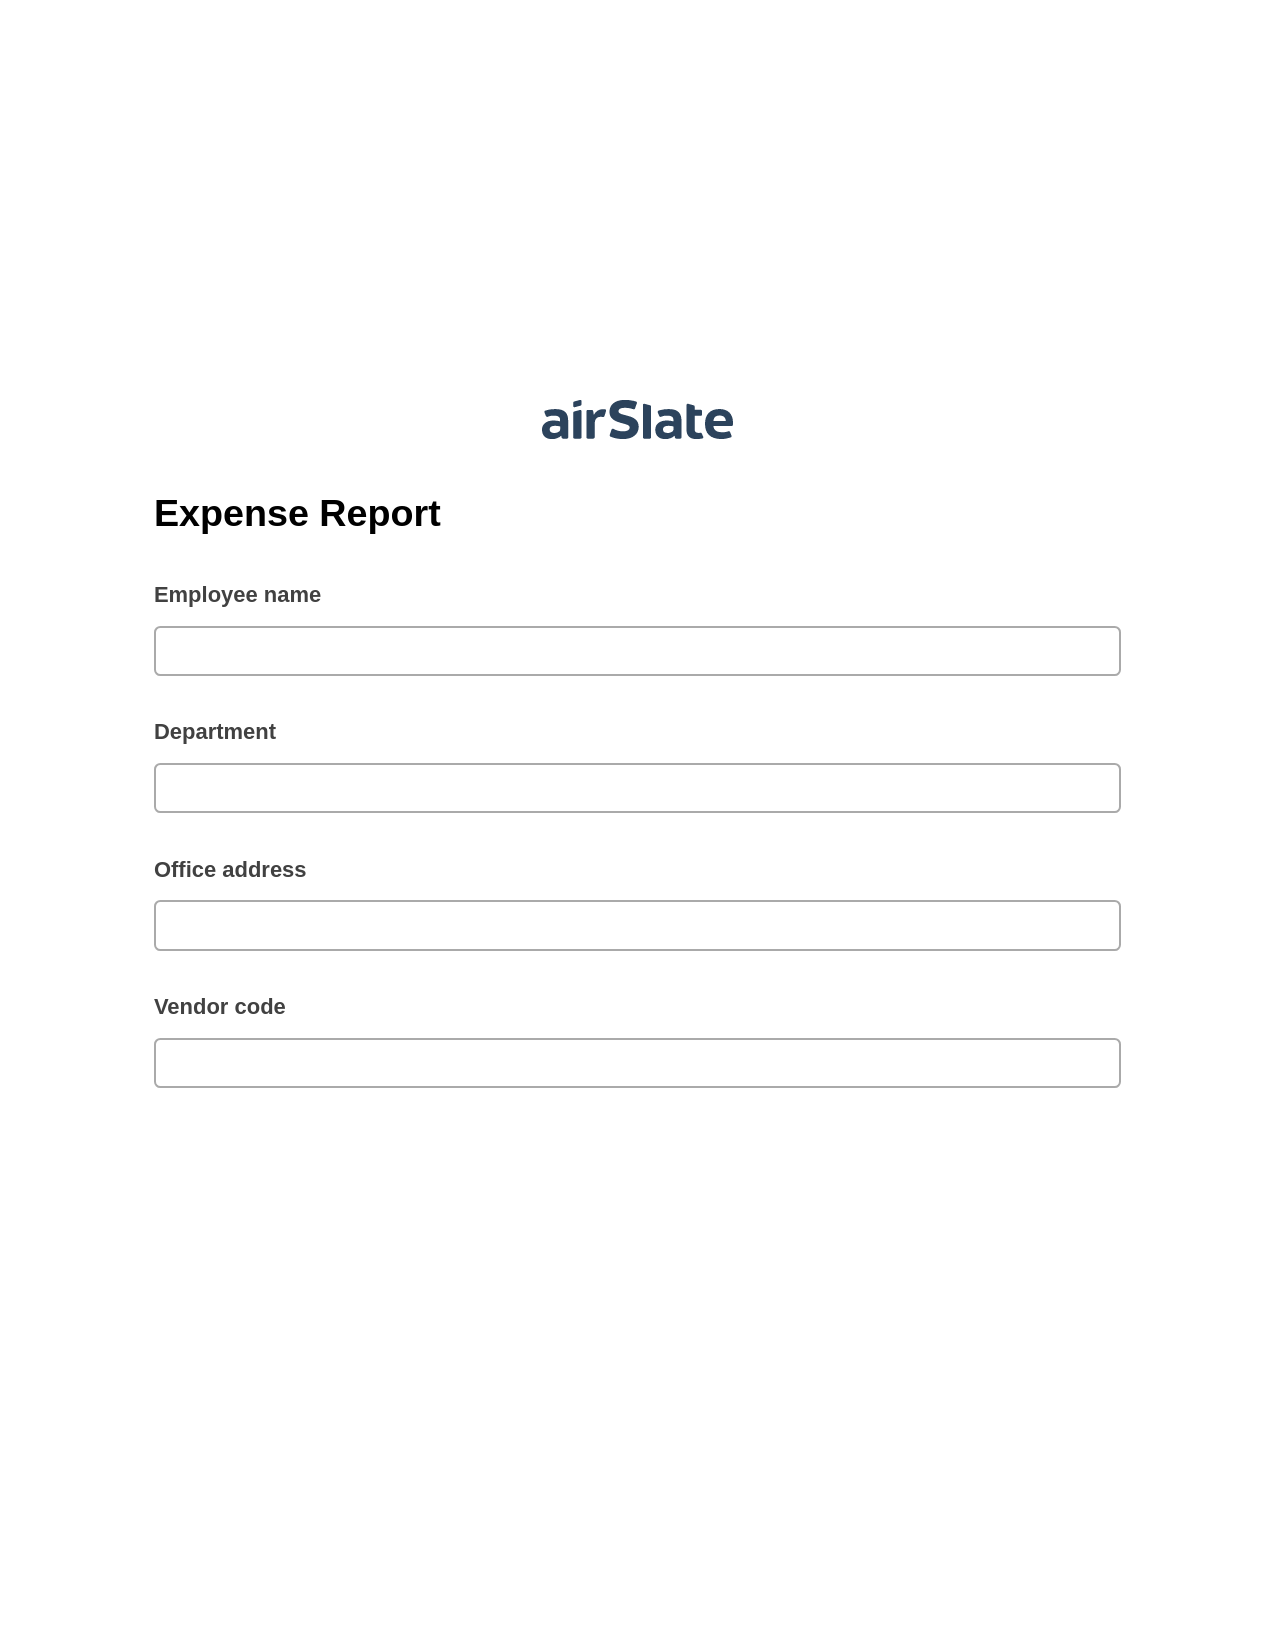 Multirole Expense Report Pre-fill from CSV File Bot, Export to MS Dynamics 365 Bot, Export to Smartsheet